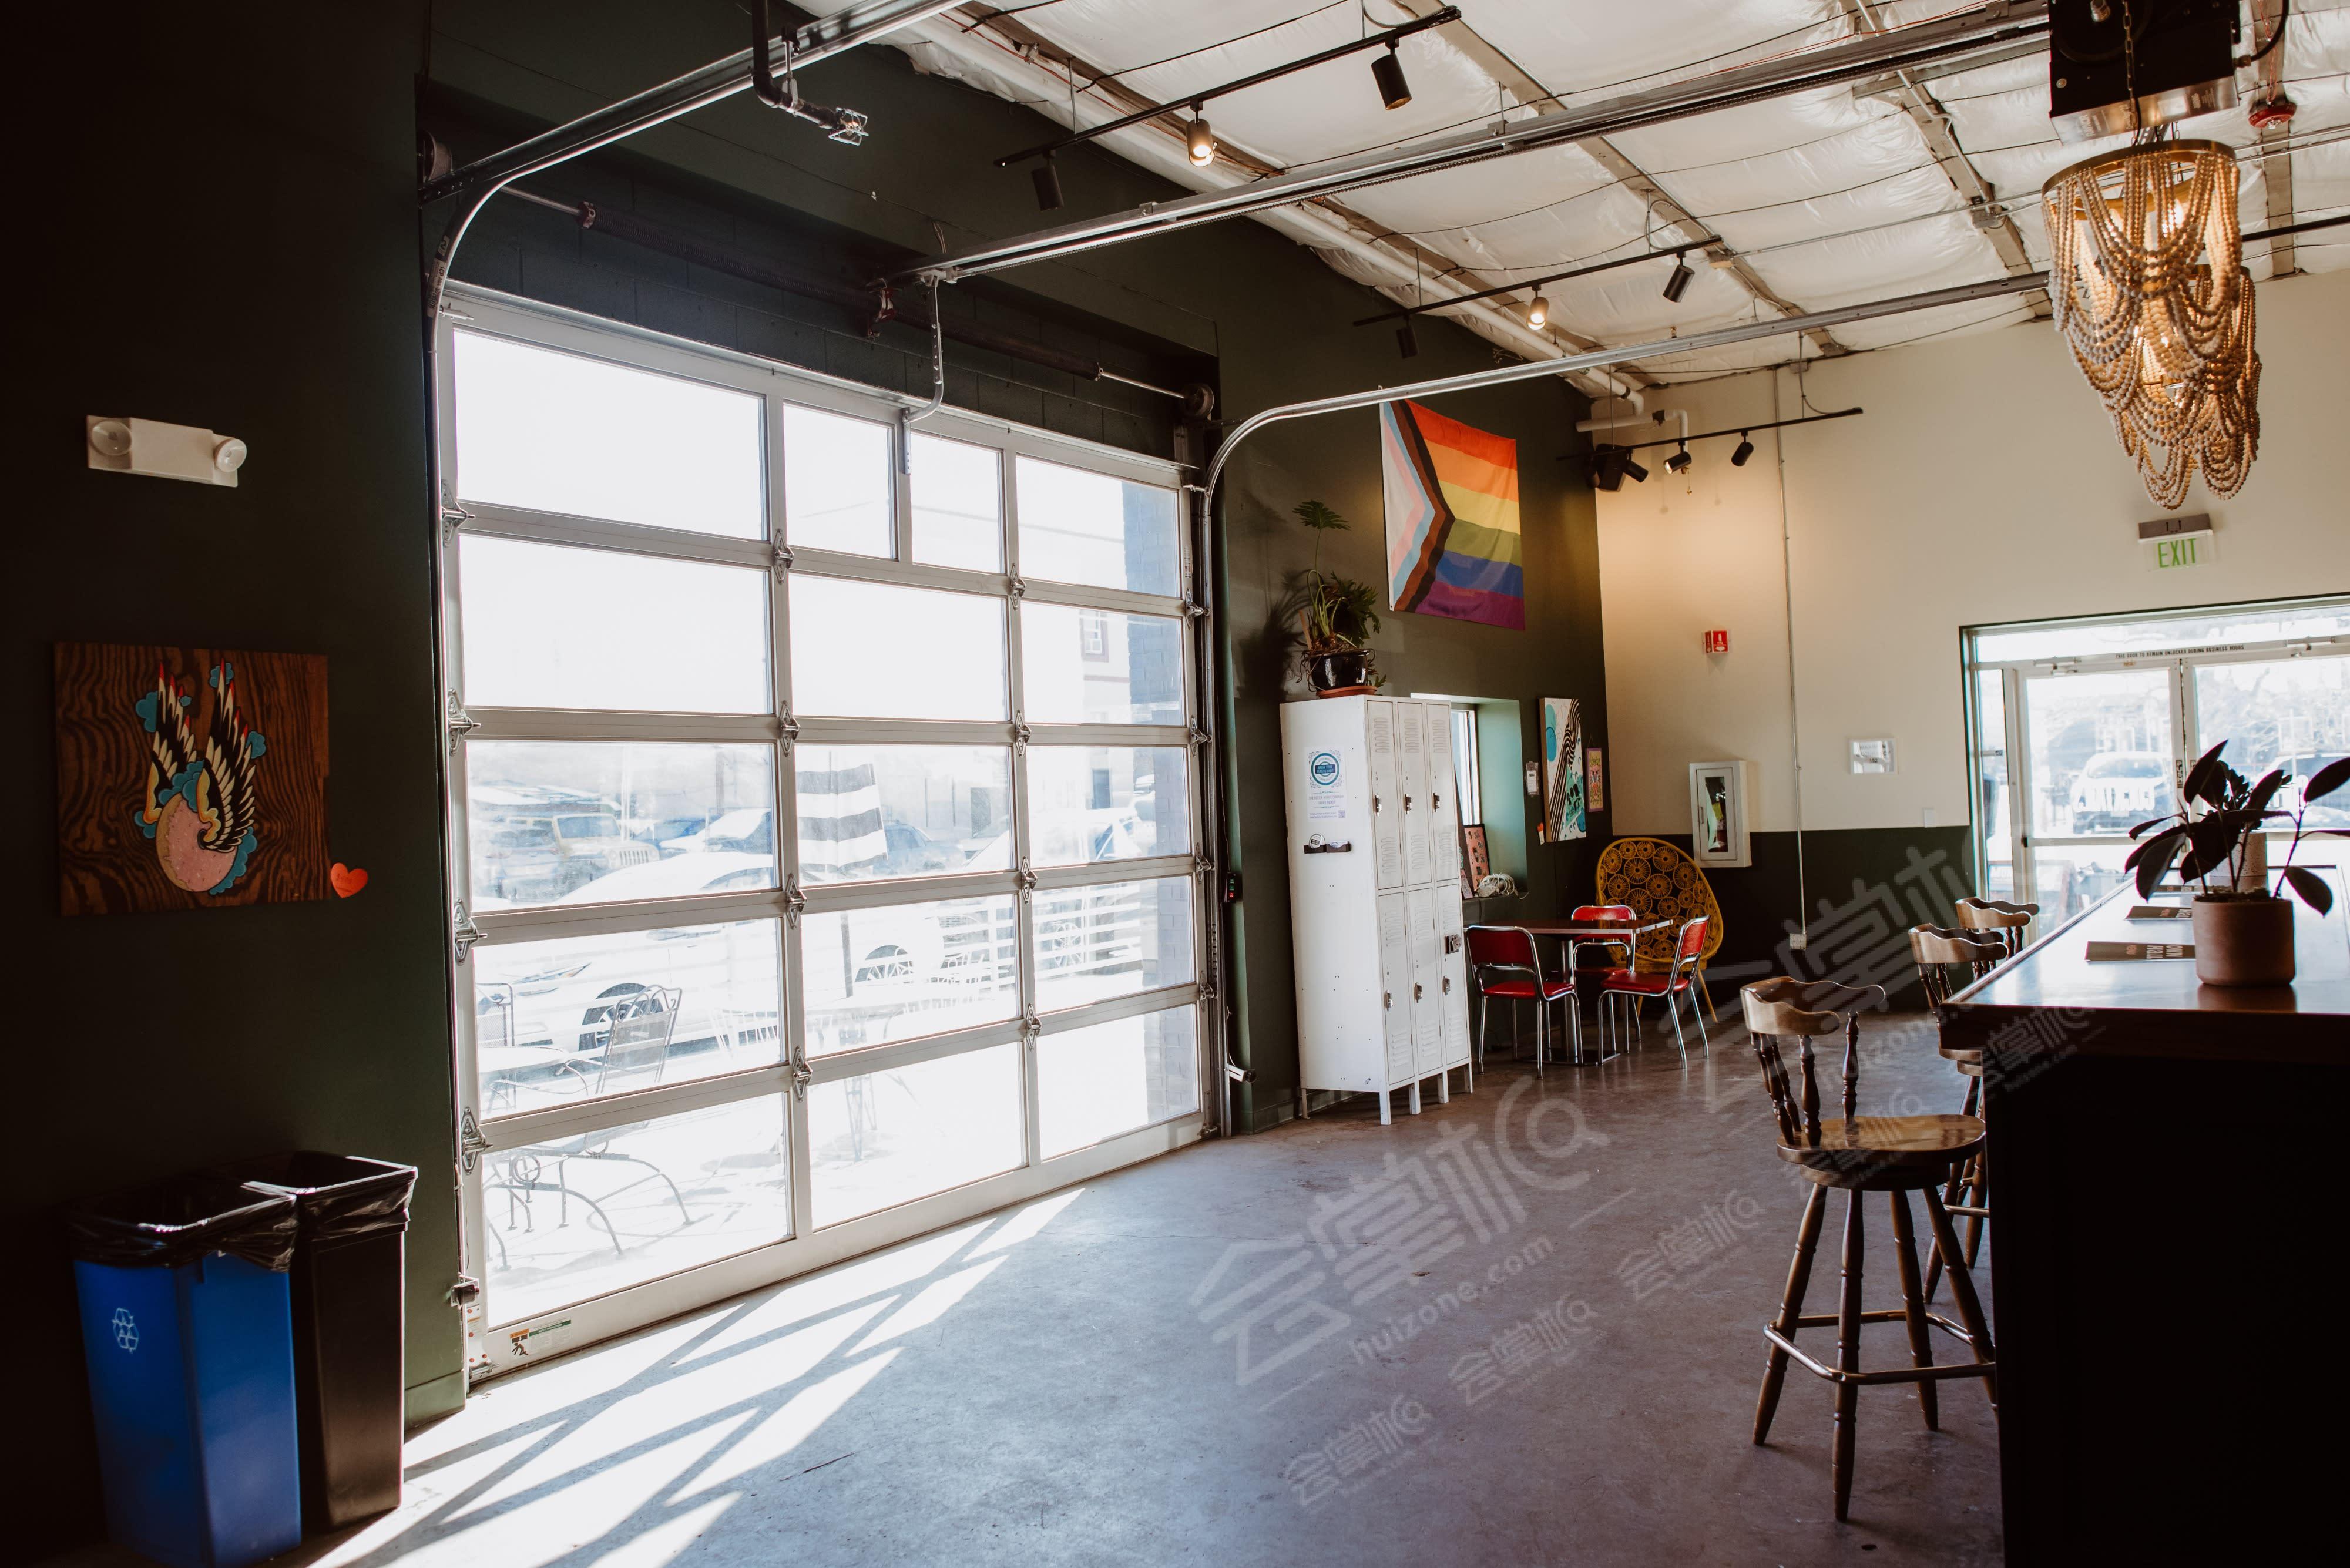 Spacious & Eclectic Event Venue in The Heart of Denver